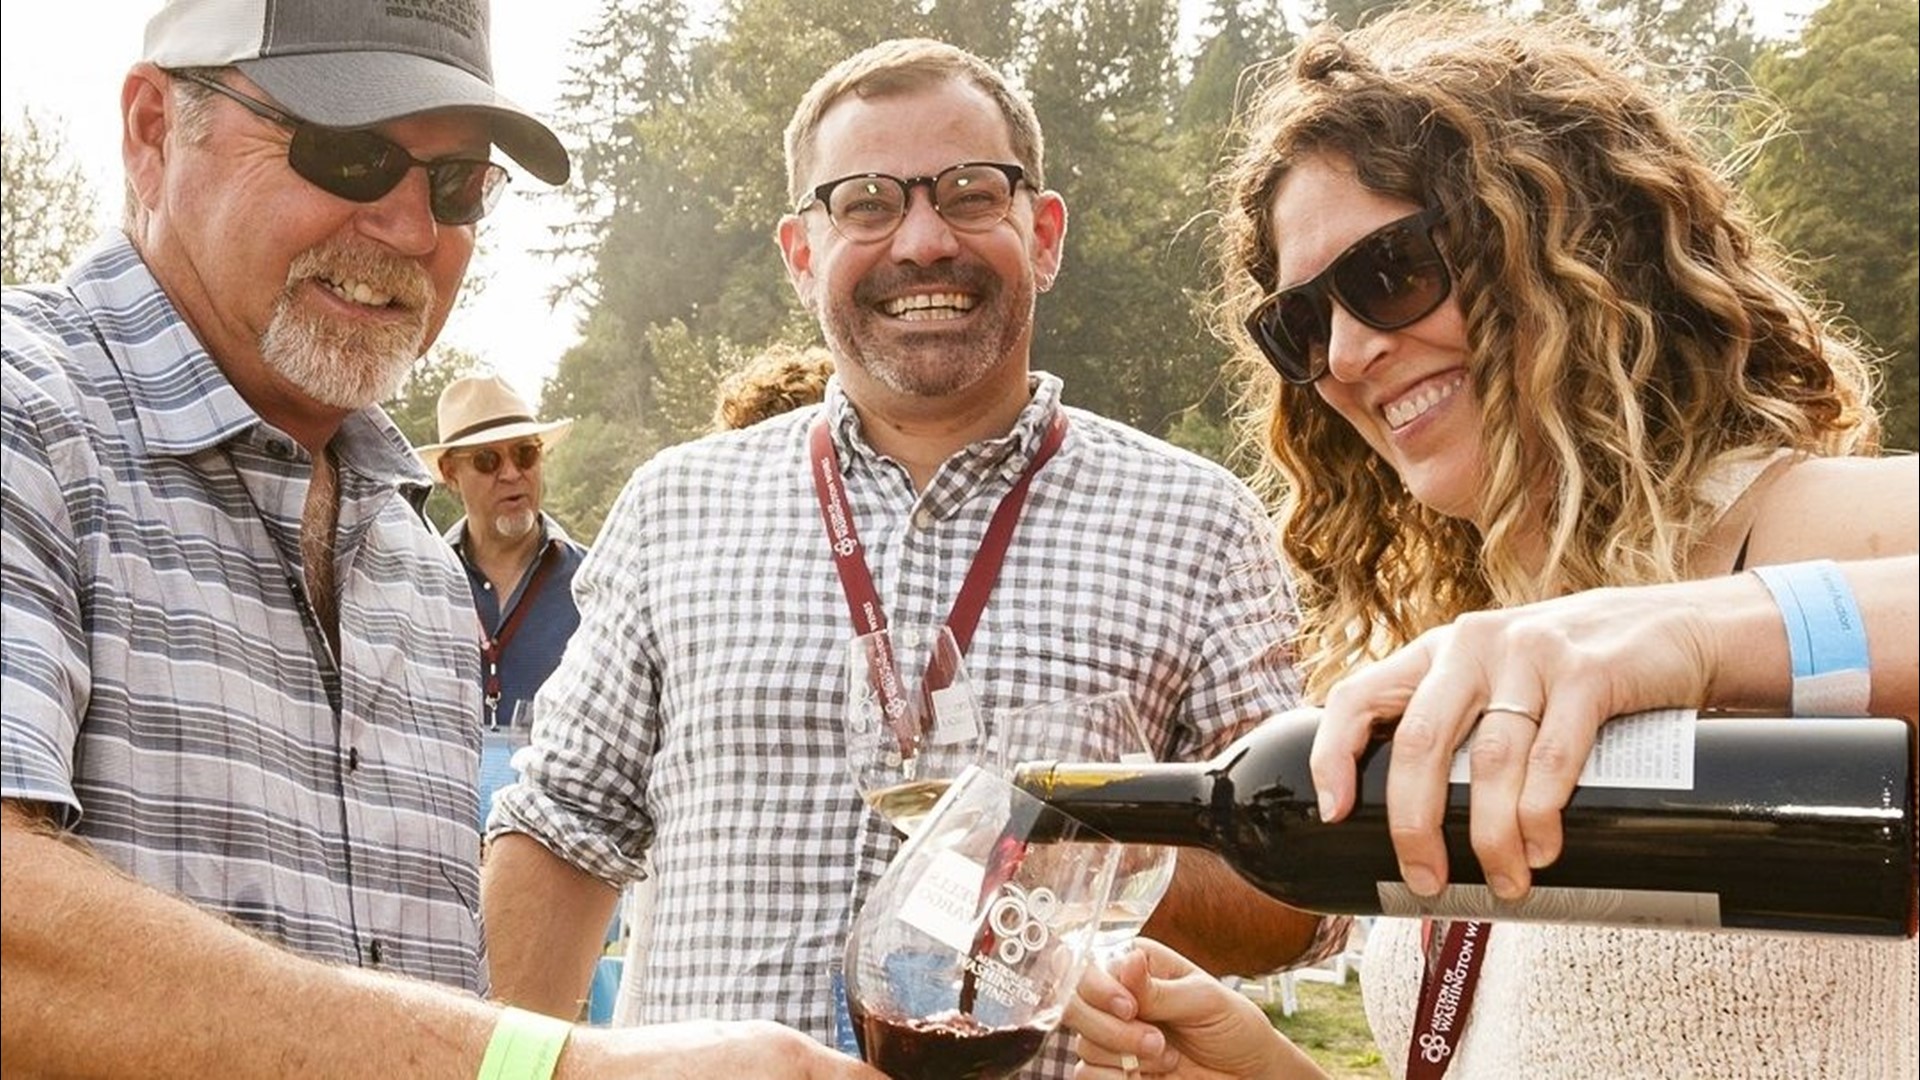 Northwest wine makers and wine drinkers gather for good causes at Auction of Washington Wines